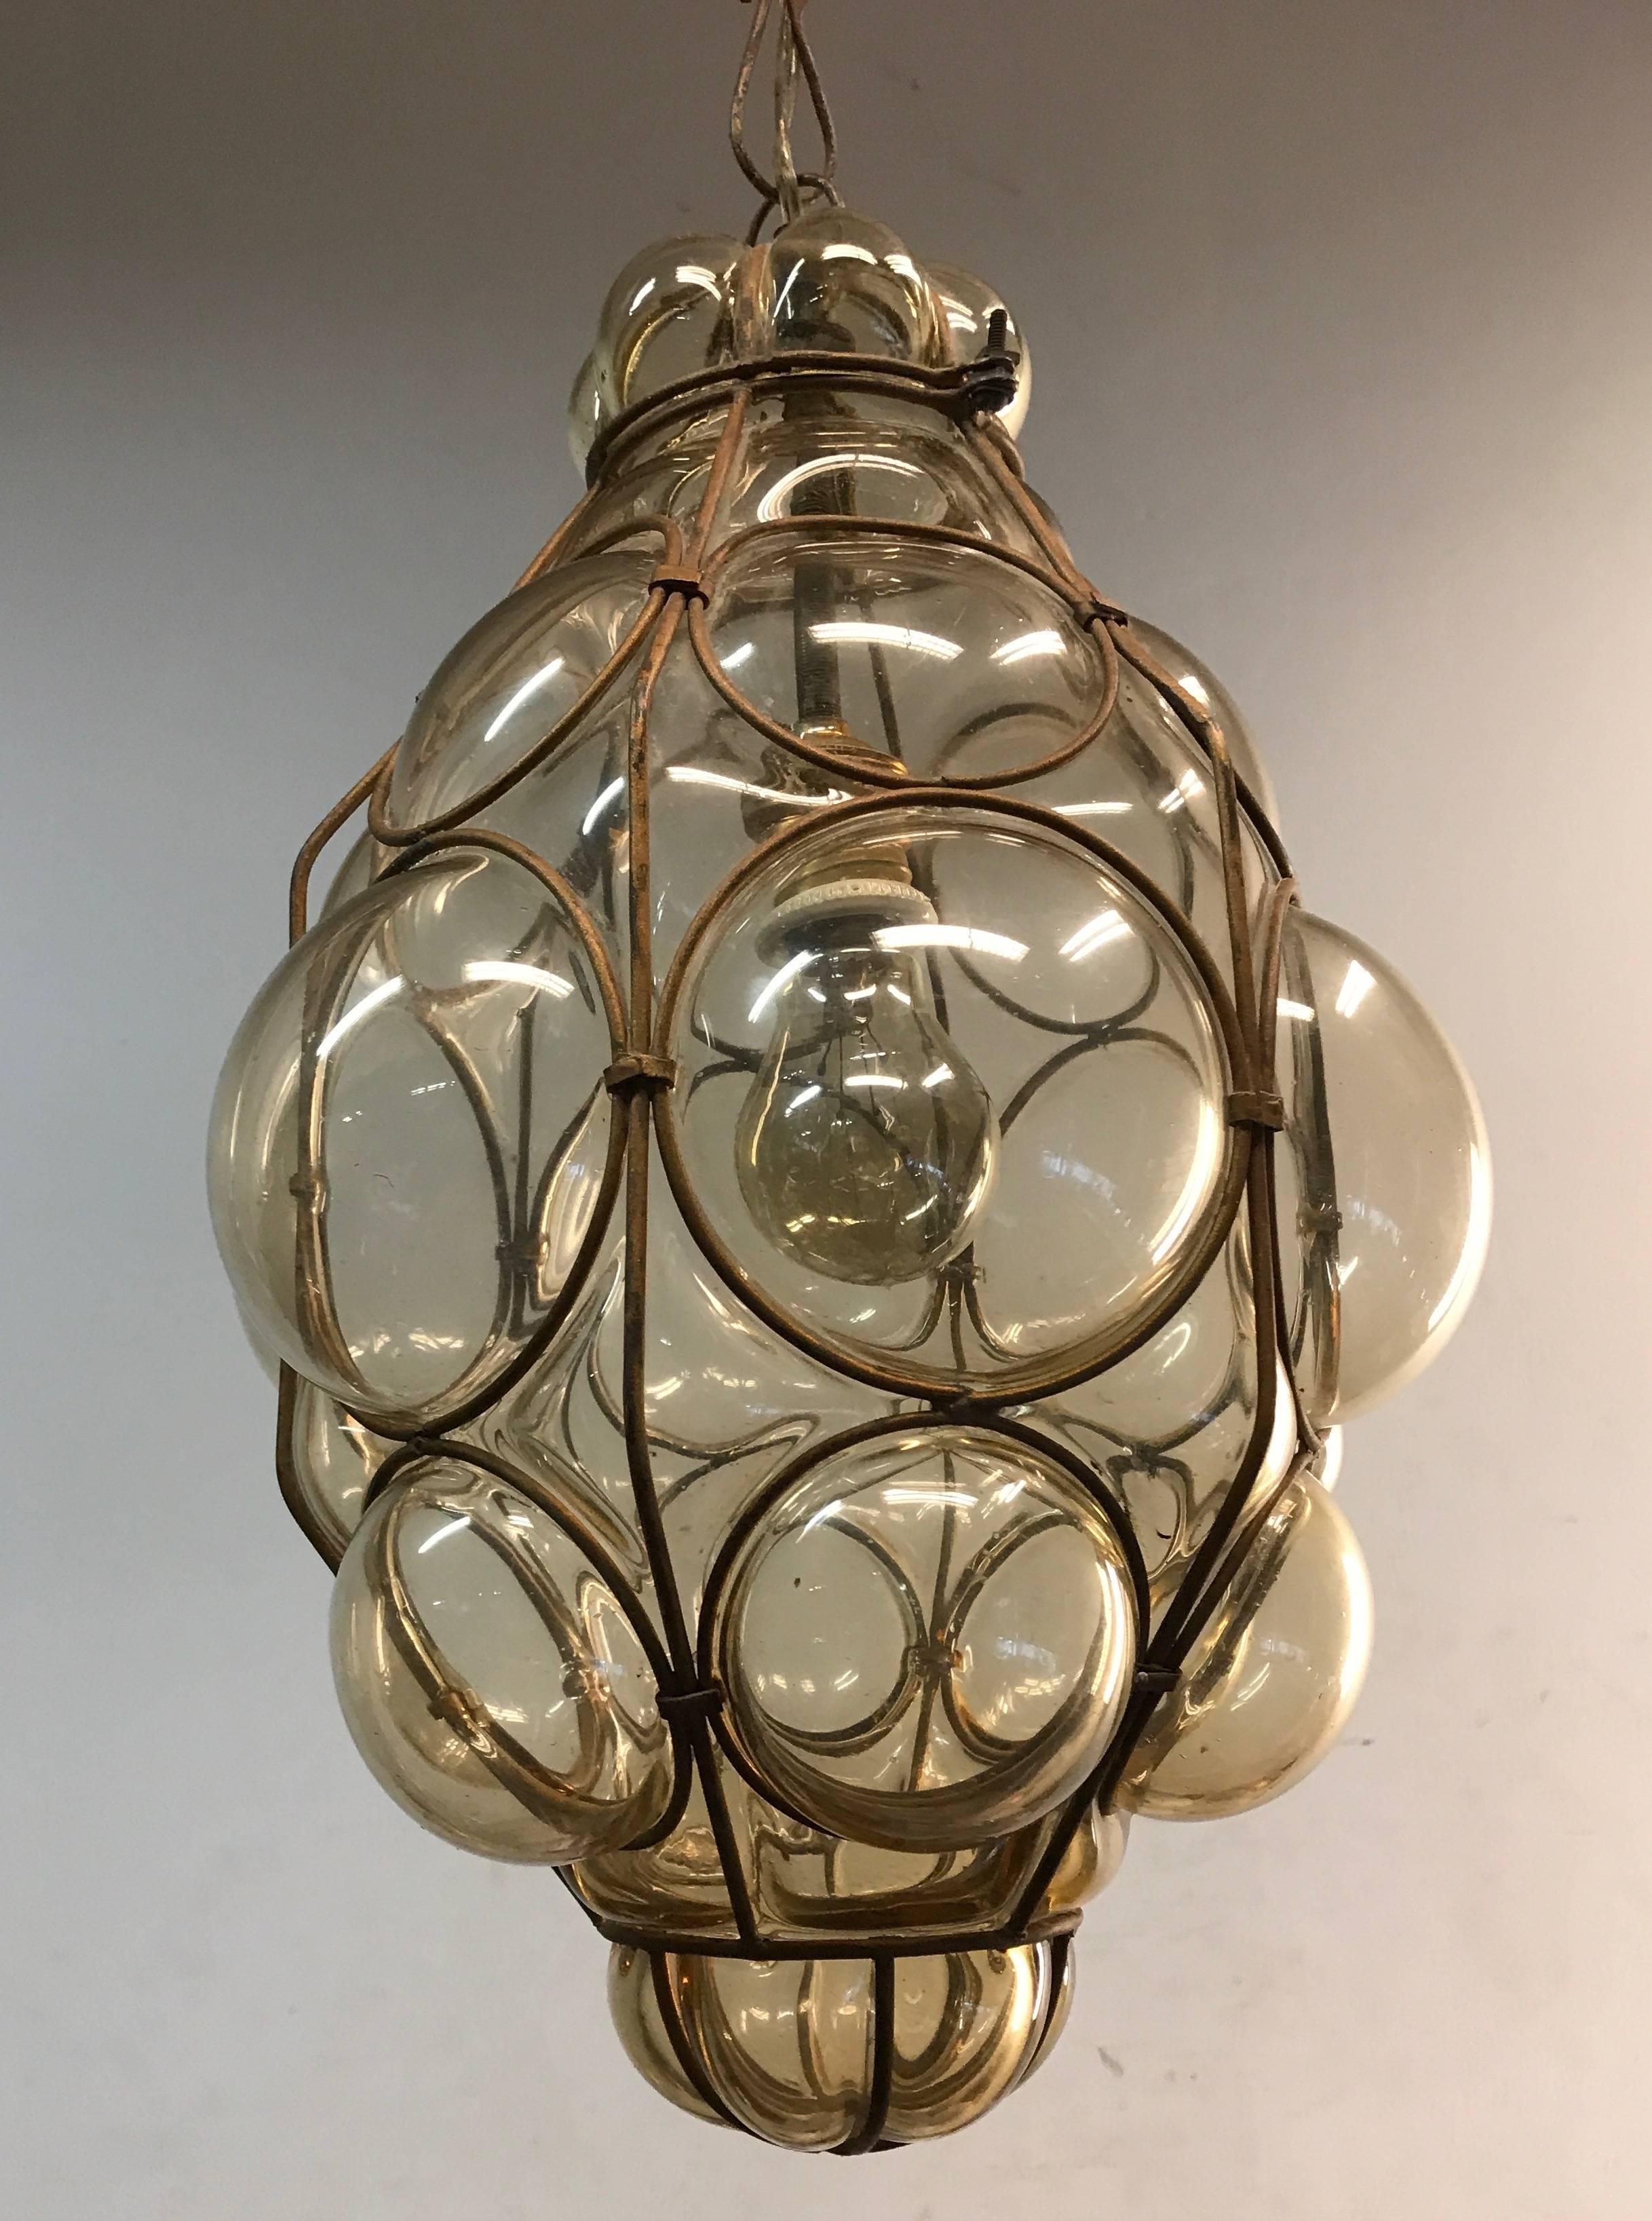 Early 20th century, Italian craftsmanship pendant.  

This stylish single light pendant is beautiful in shape and the mouth blown, bronze tinted glass is in excellent condition. It comes with the original chain and metal canopy and the bulb can